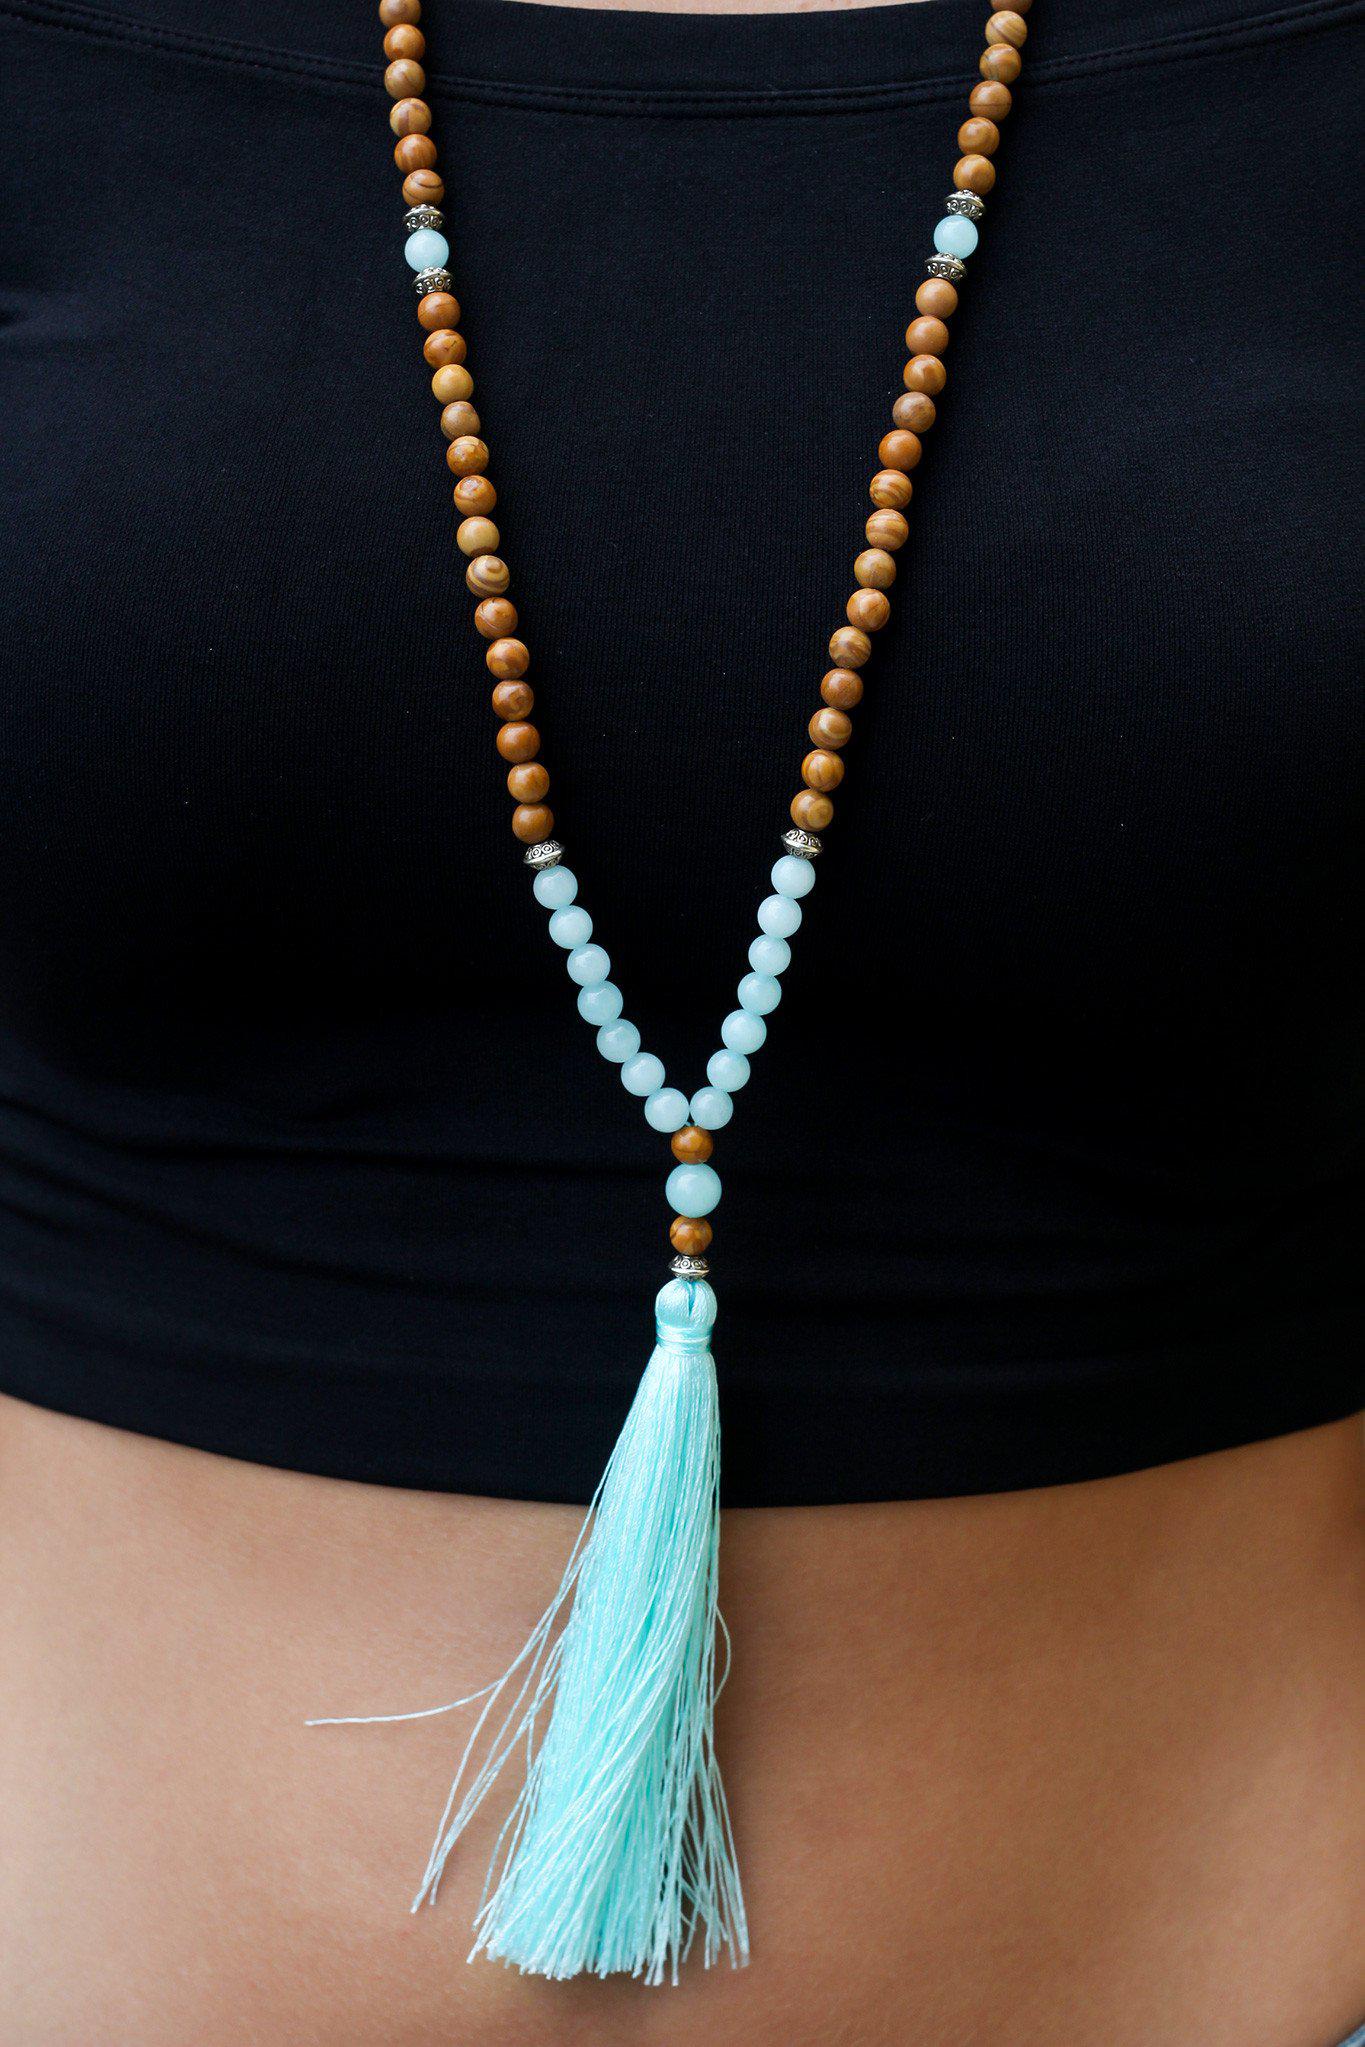 Brown Beaded Necklace with Aqua Tassel